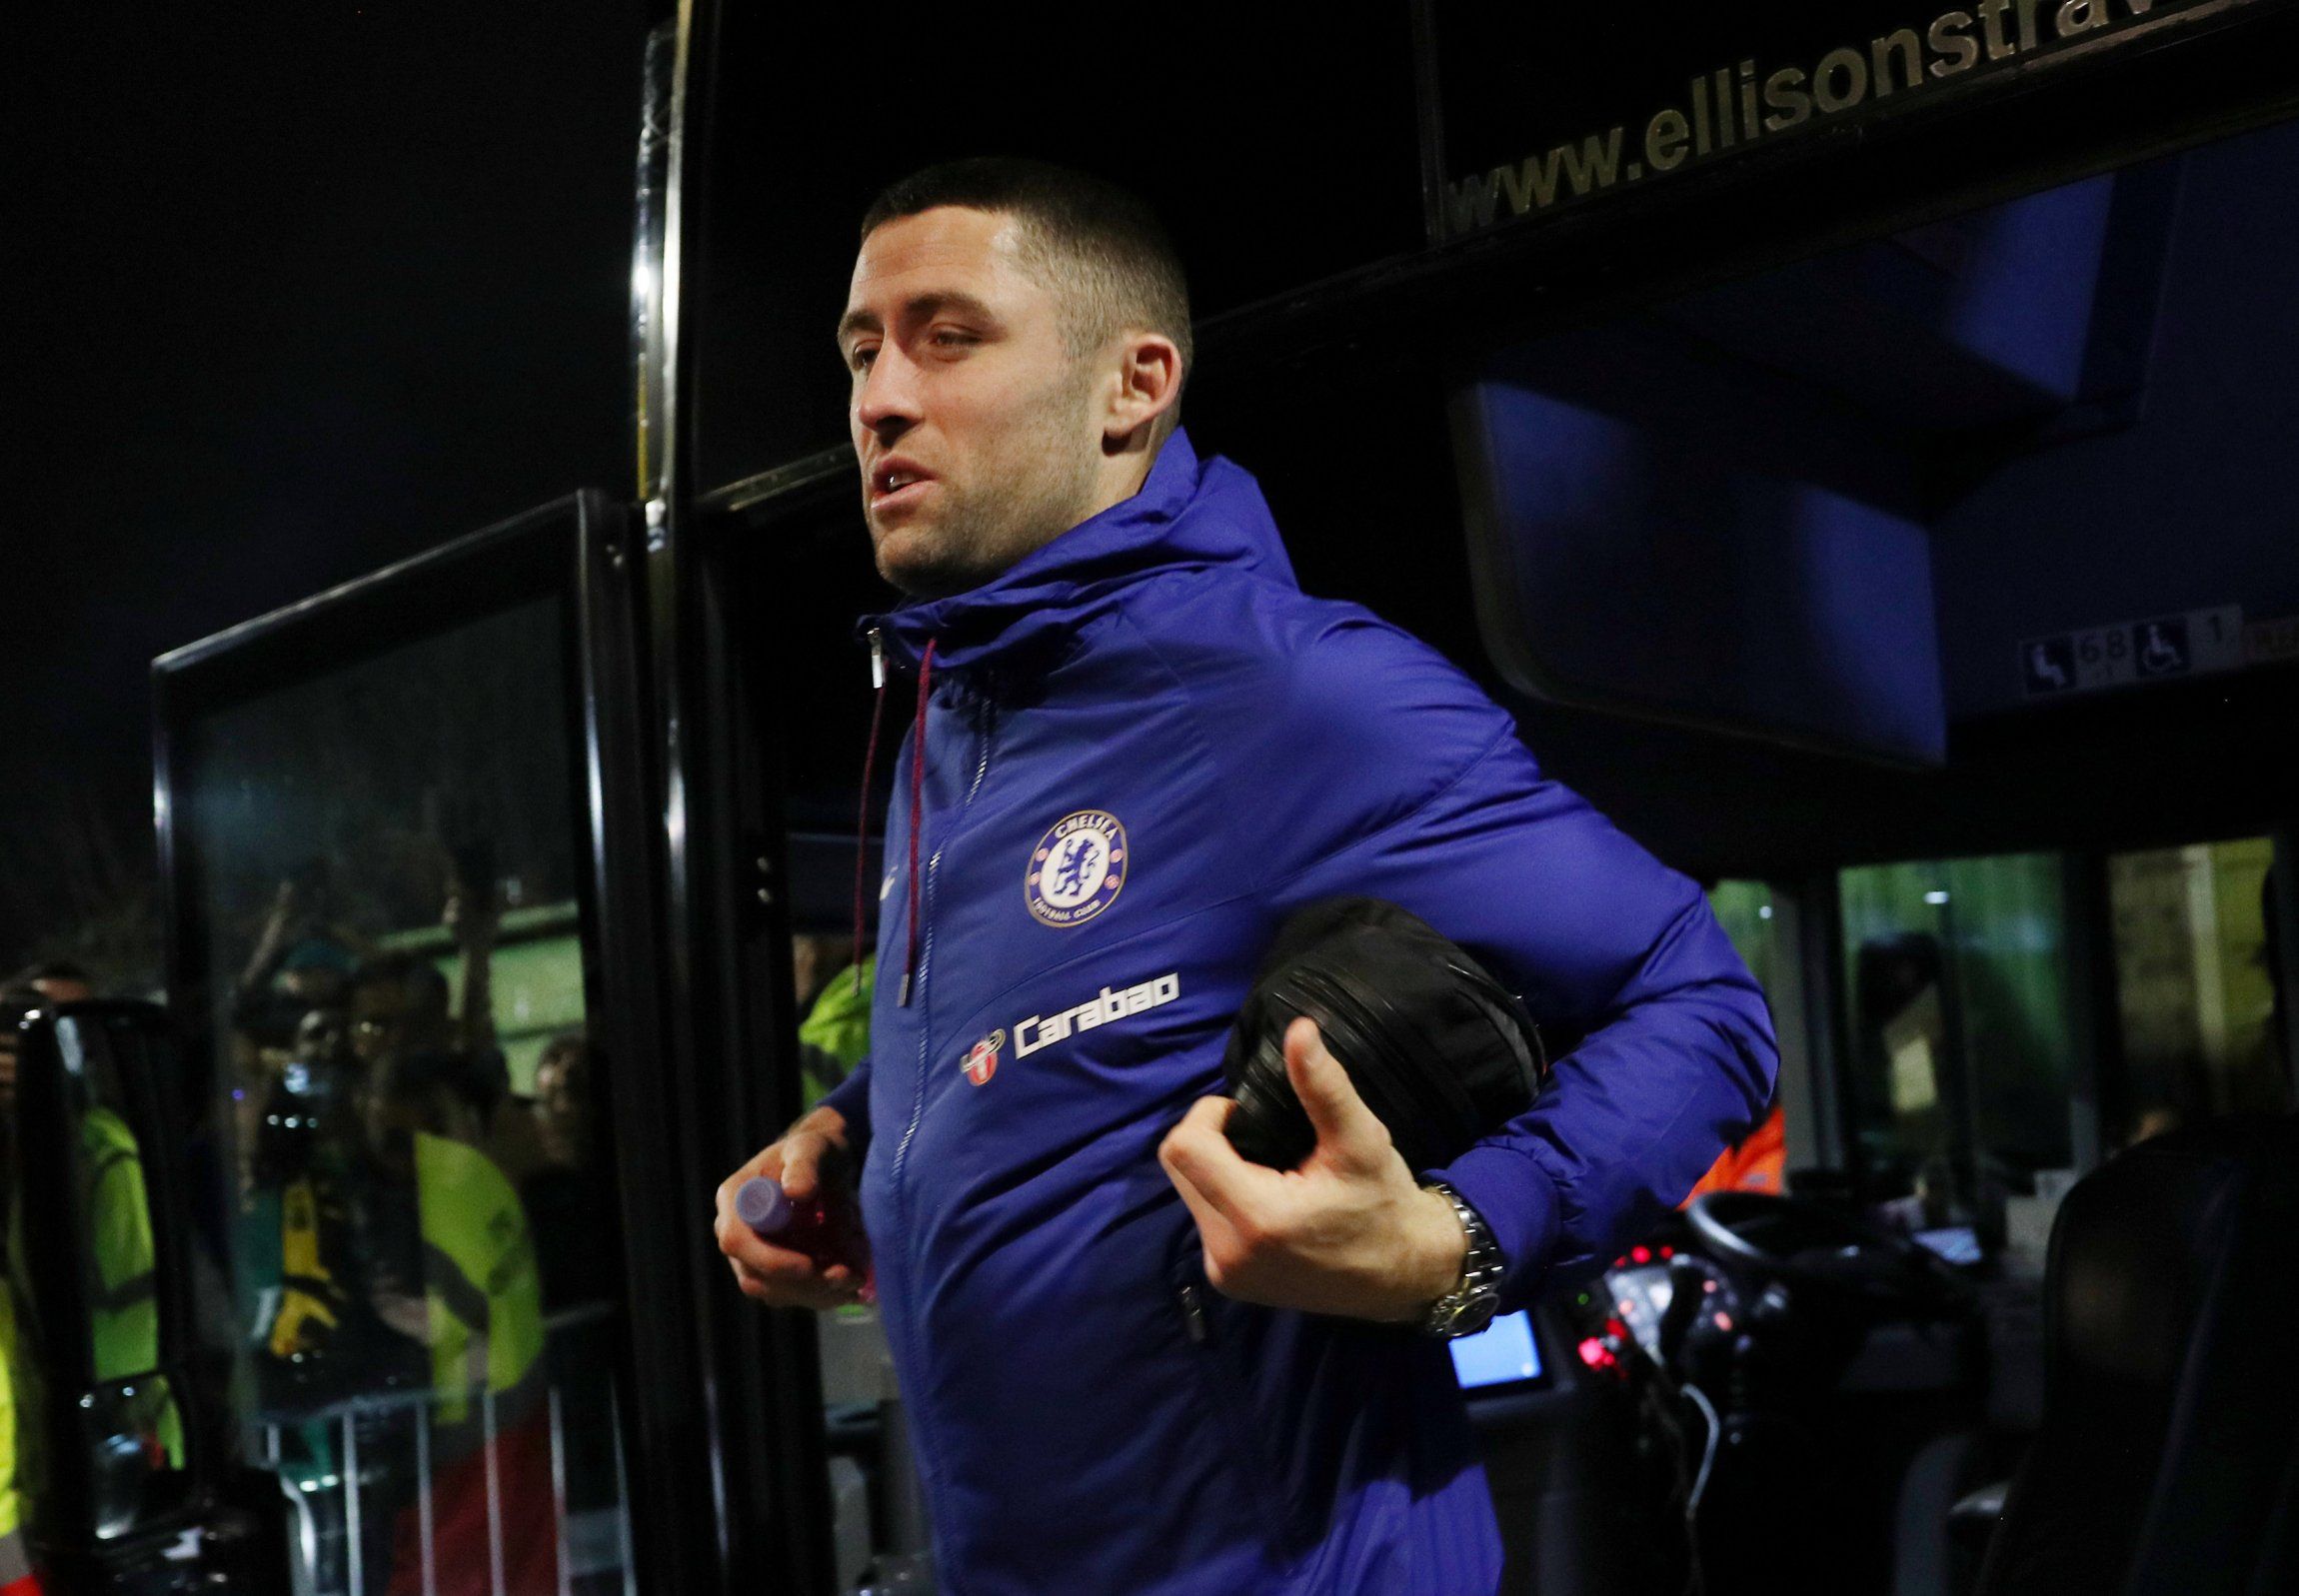 Chelsea's Gary Cahill arrives at the stadium before the Watford match